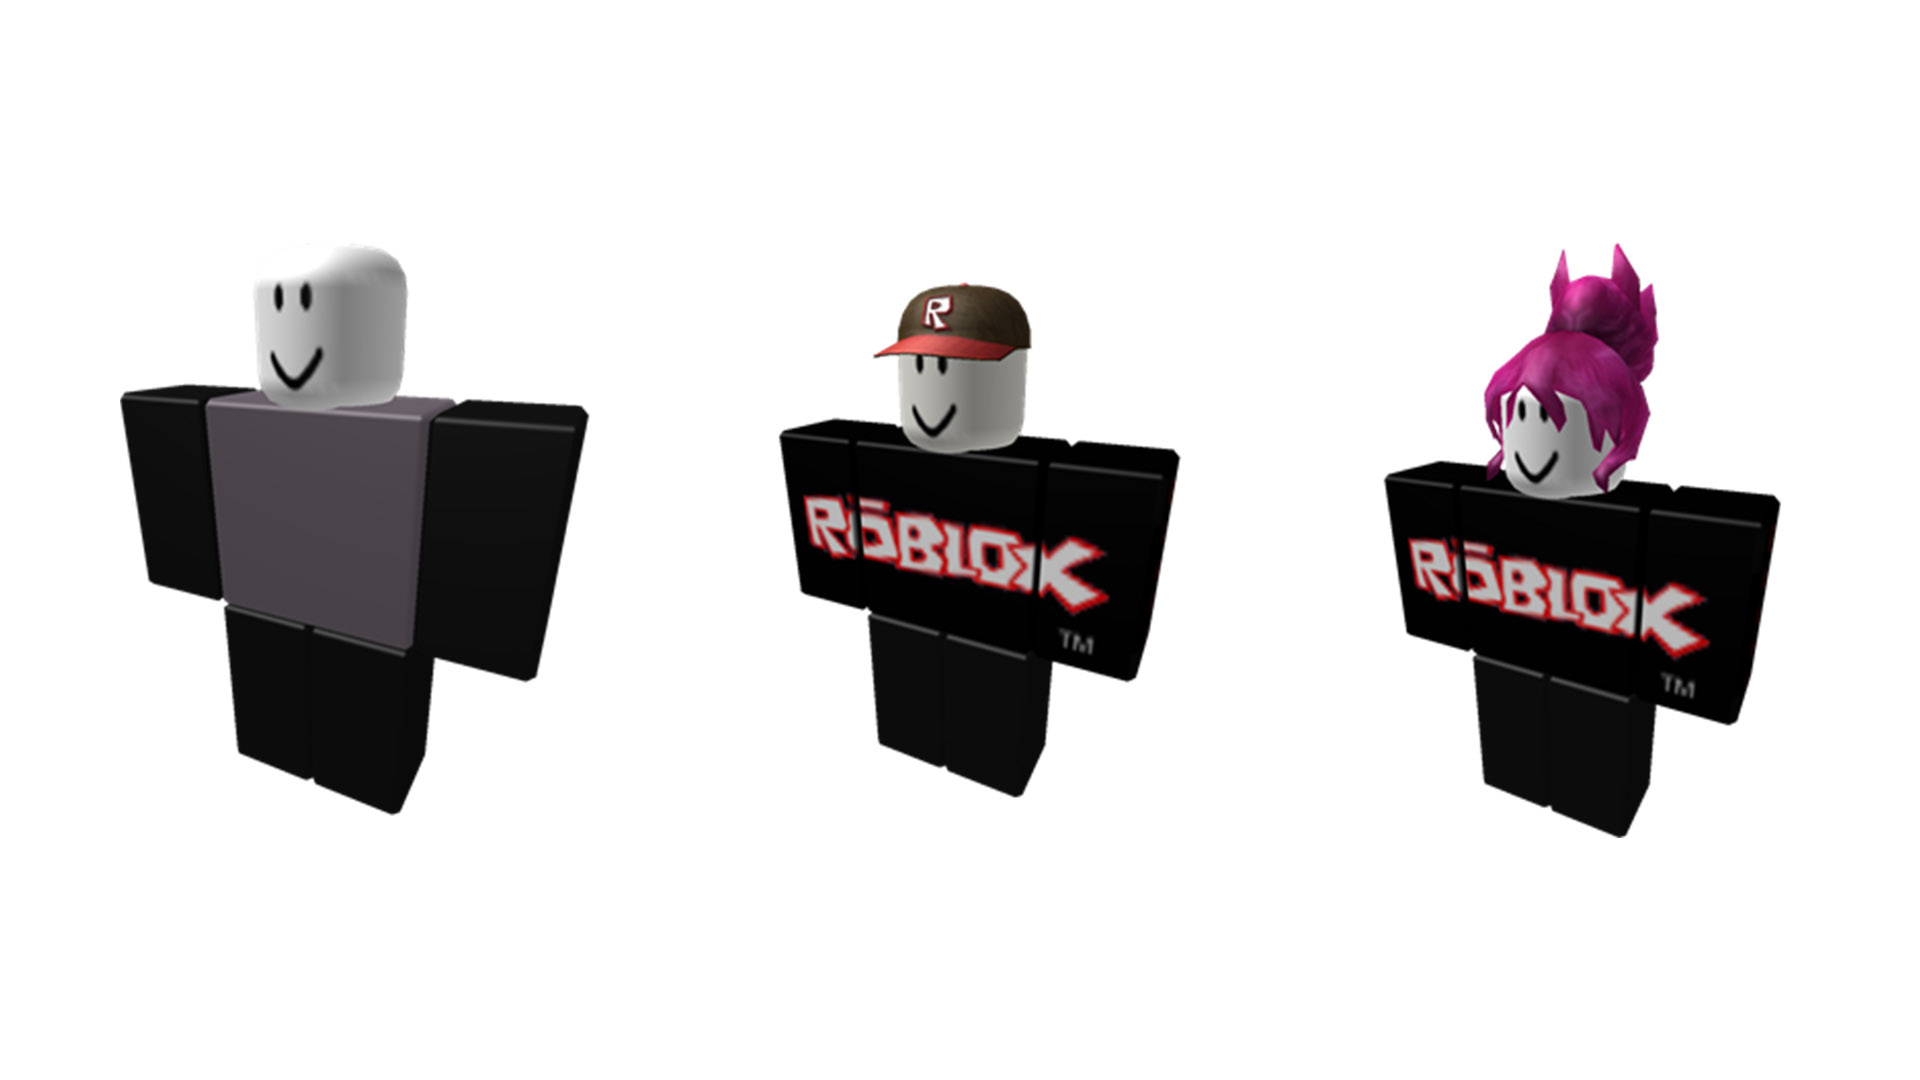 Why did Roblox add guests back? - Quora